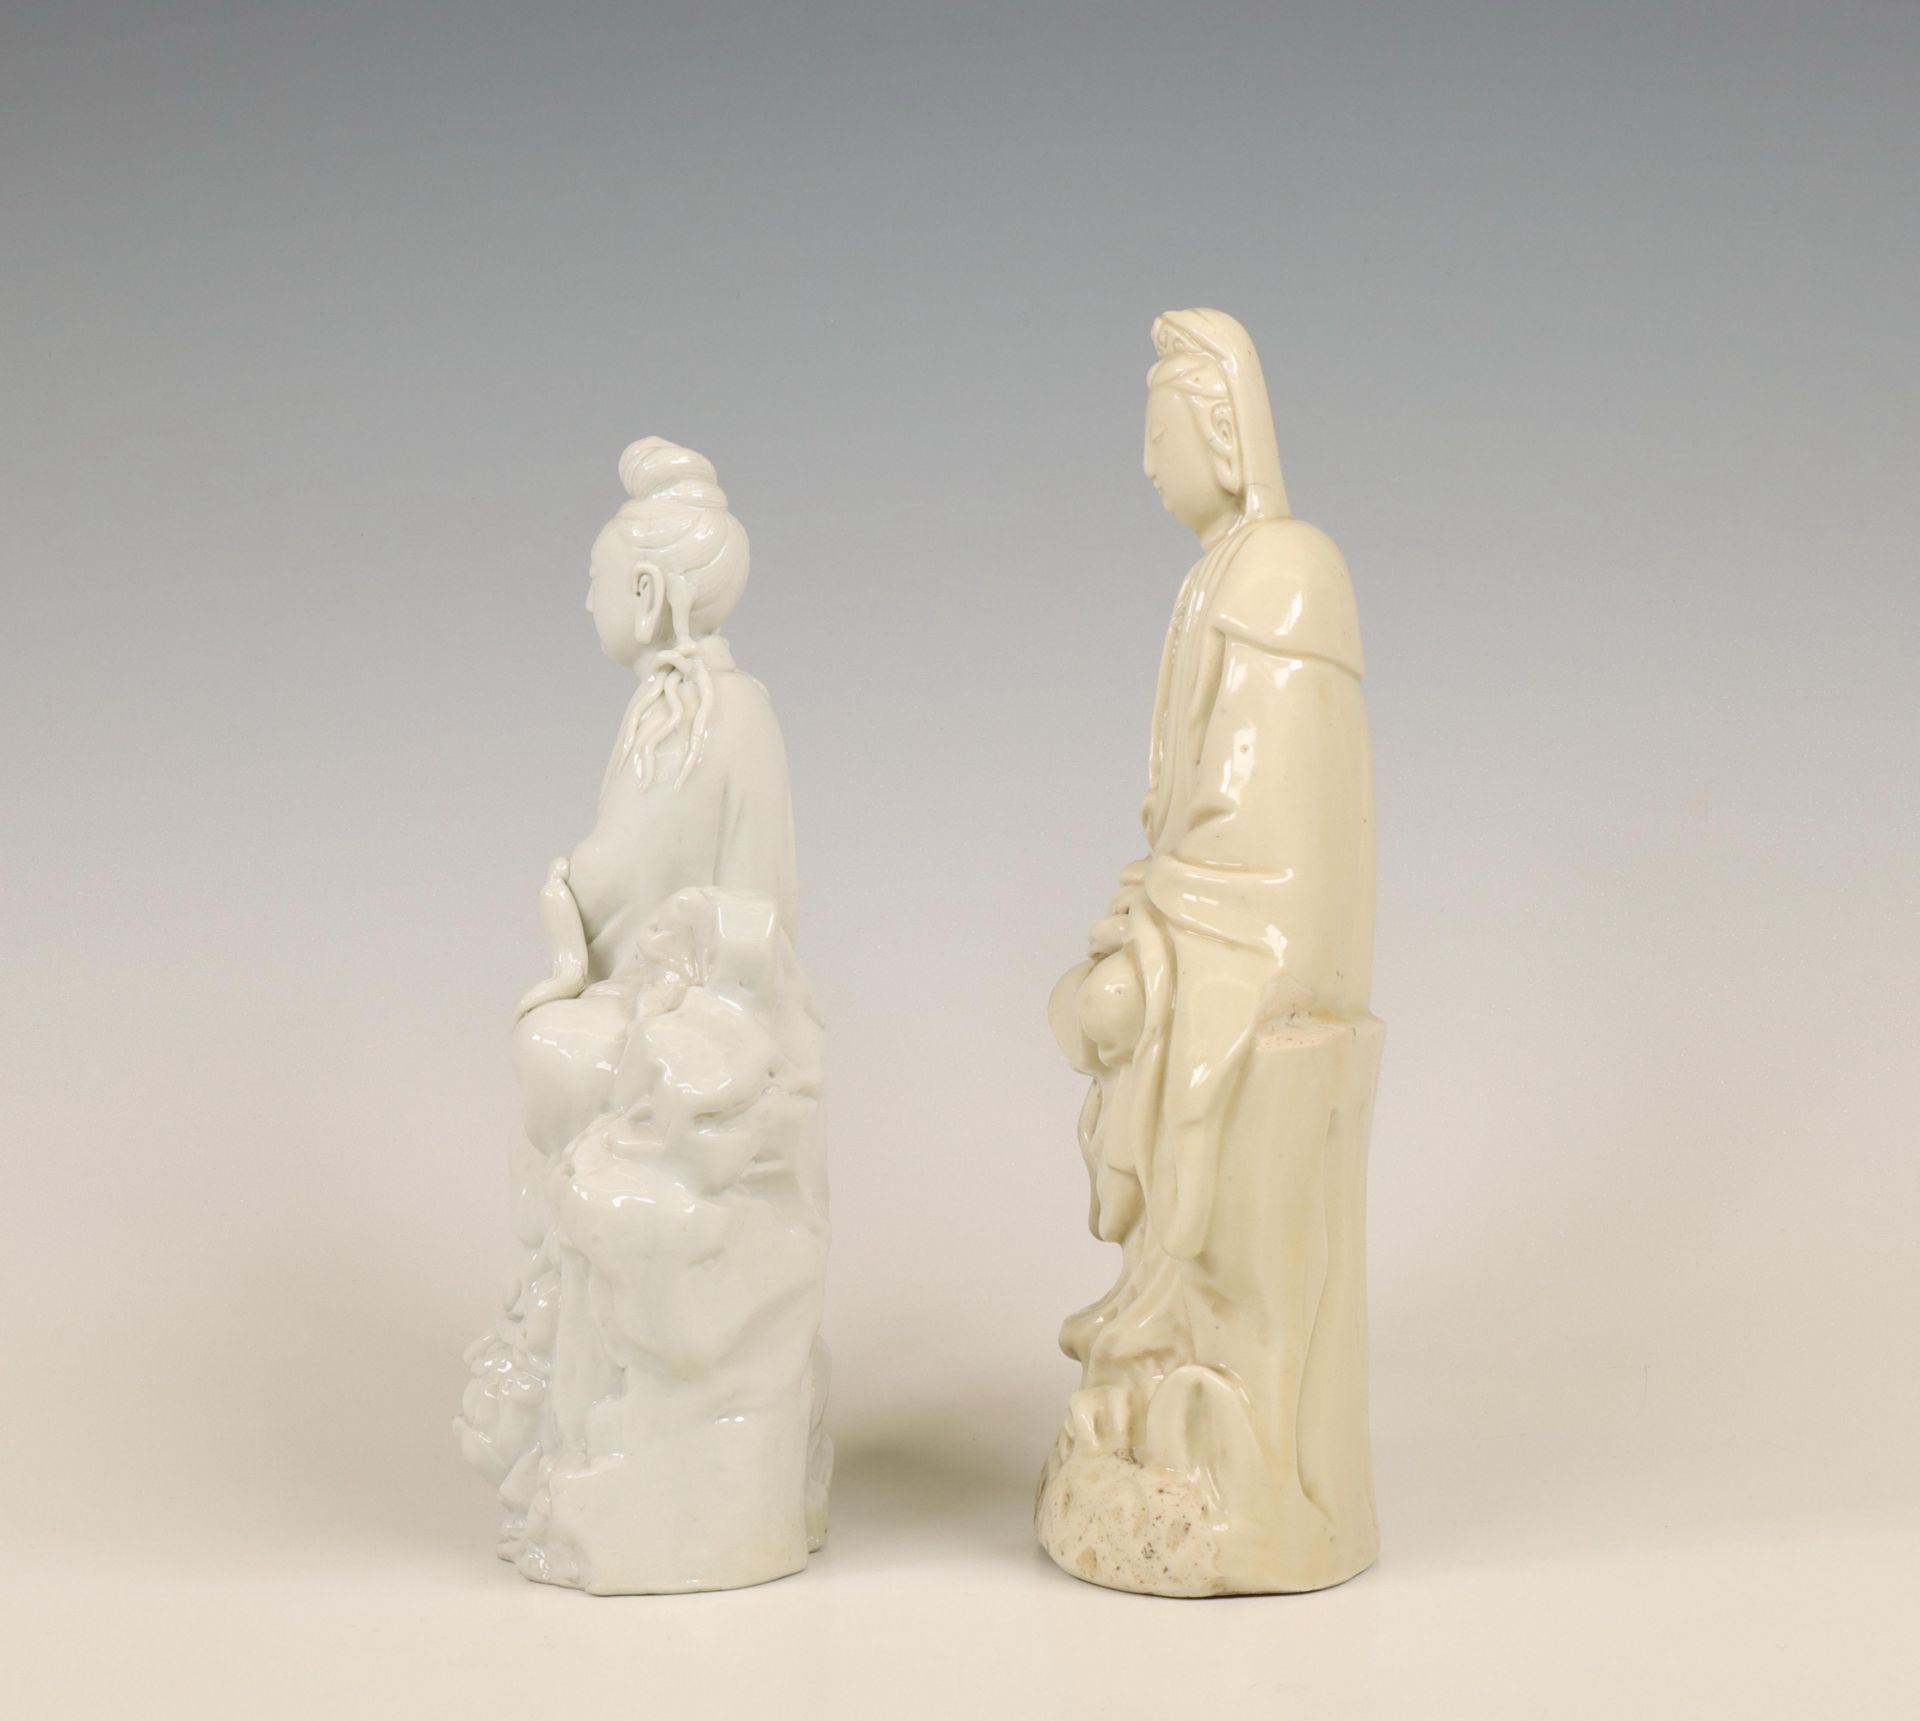 China, two Dehua/ white-glazed porcelain figures of Guanyin, 20th century, - Image 3 of 6